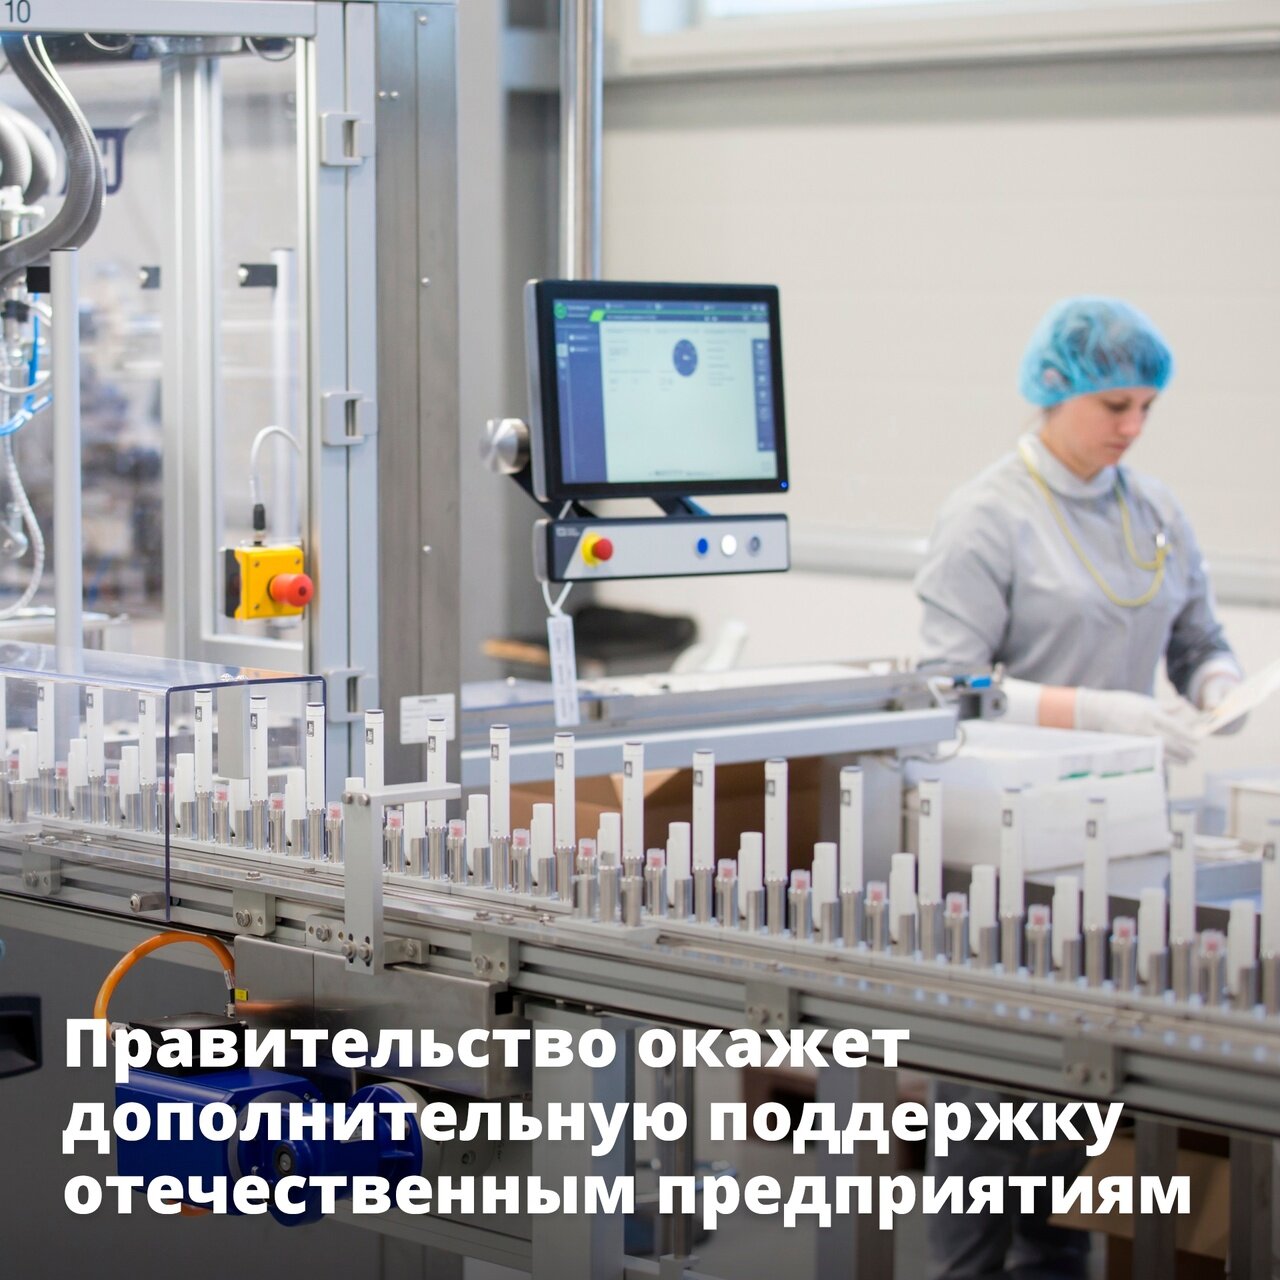 The government will provide additional assistance to domestic enterprises!